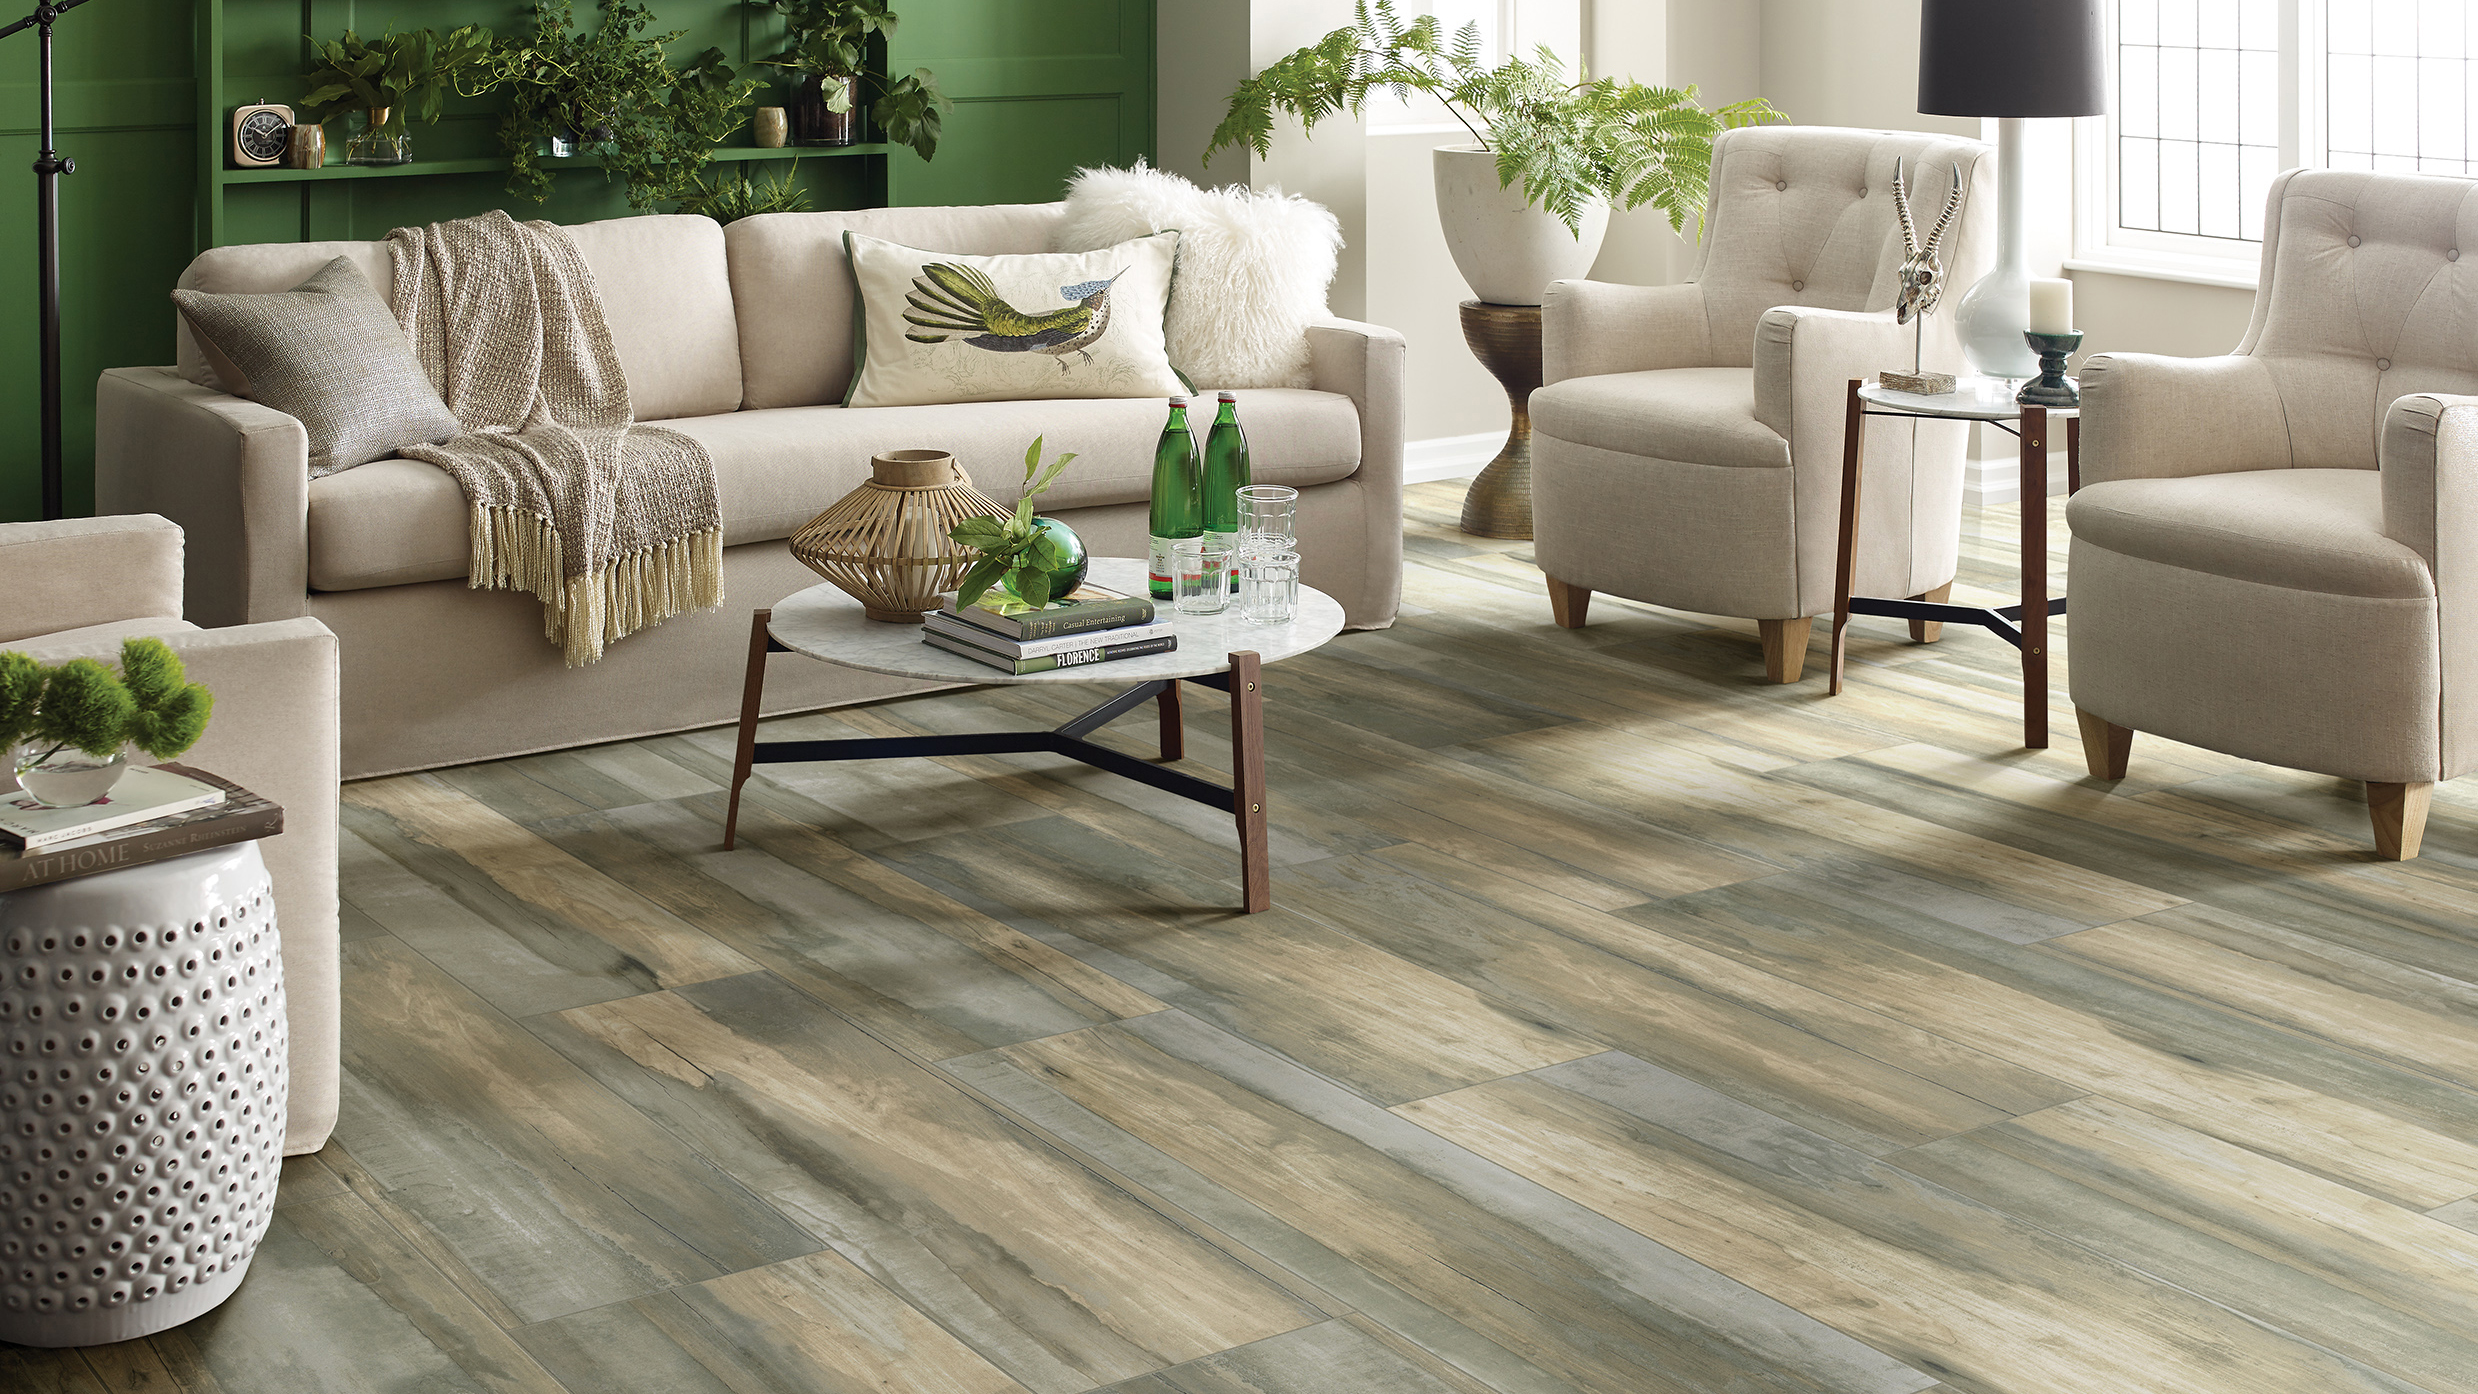 Wood-look tile in a living room, installation services available.